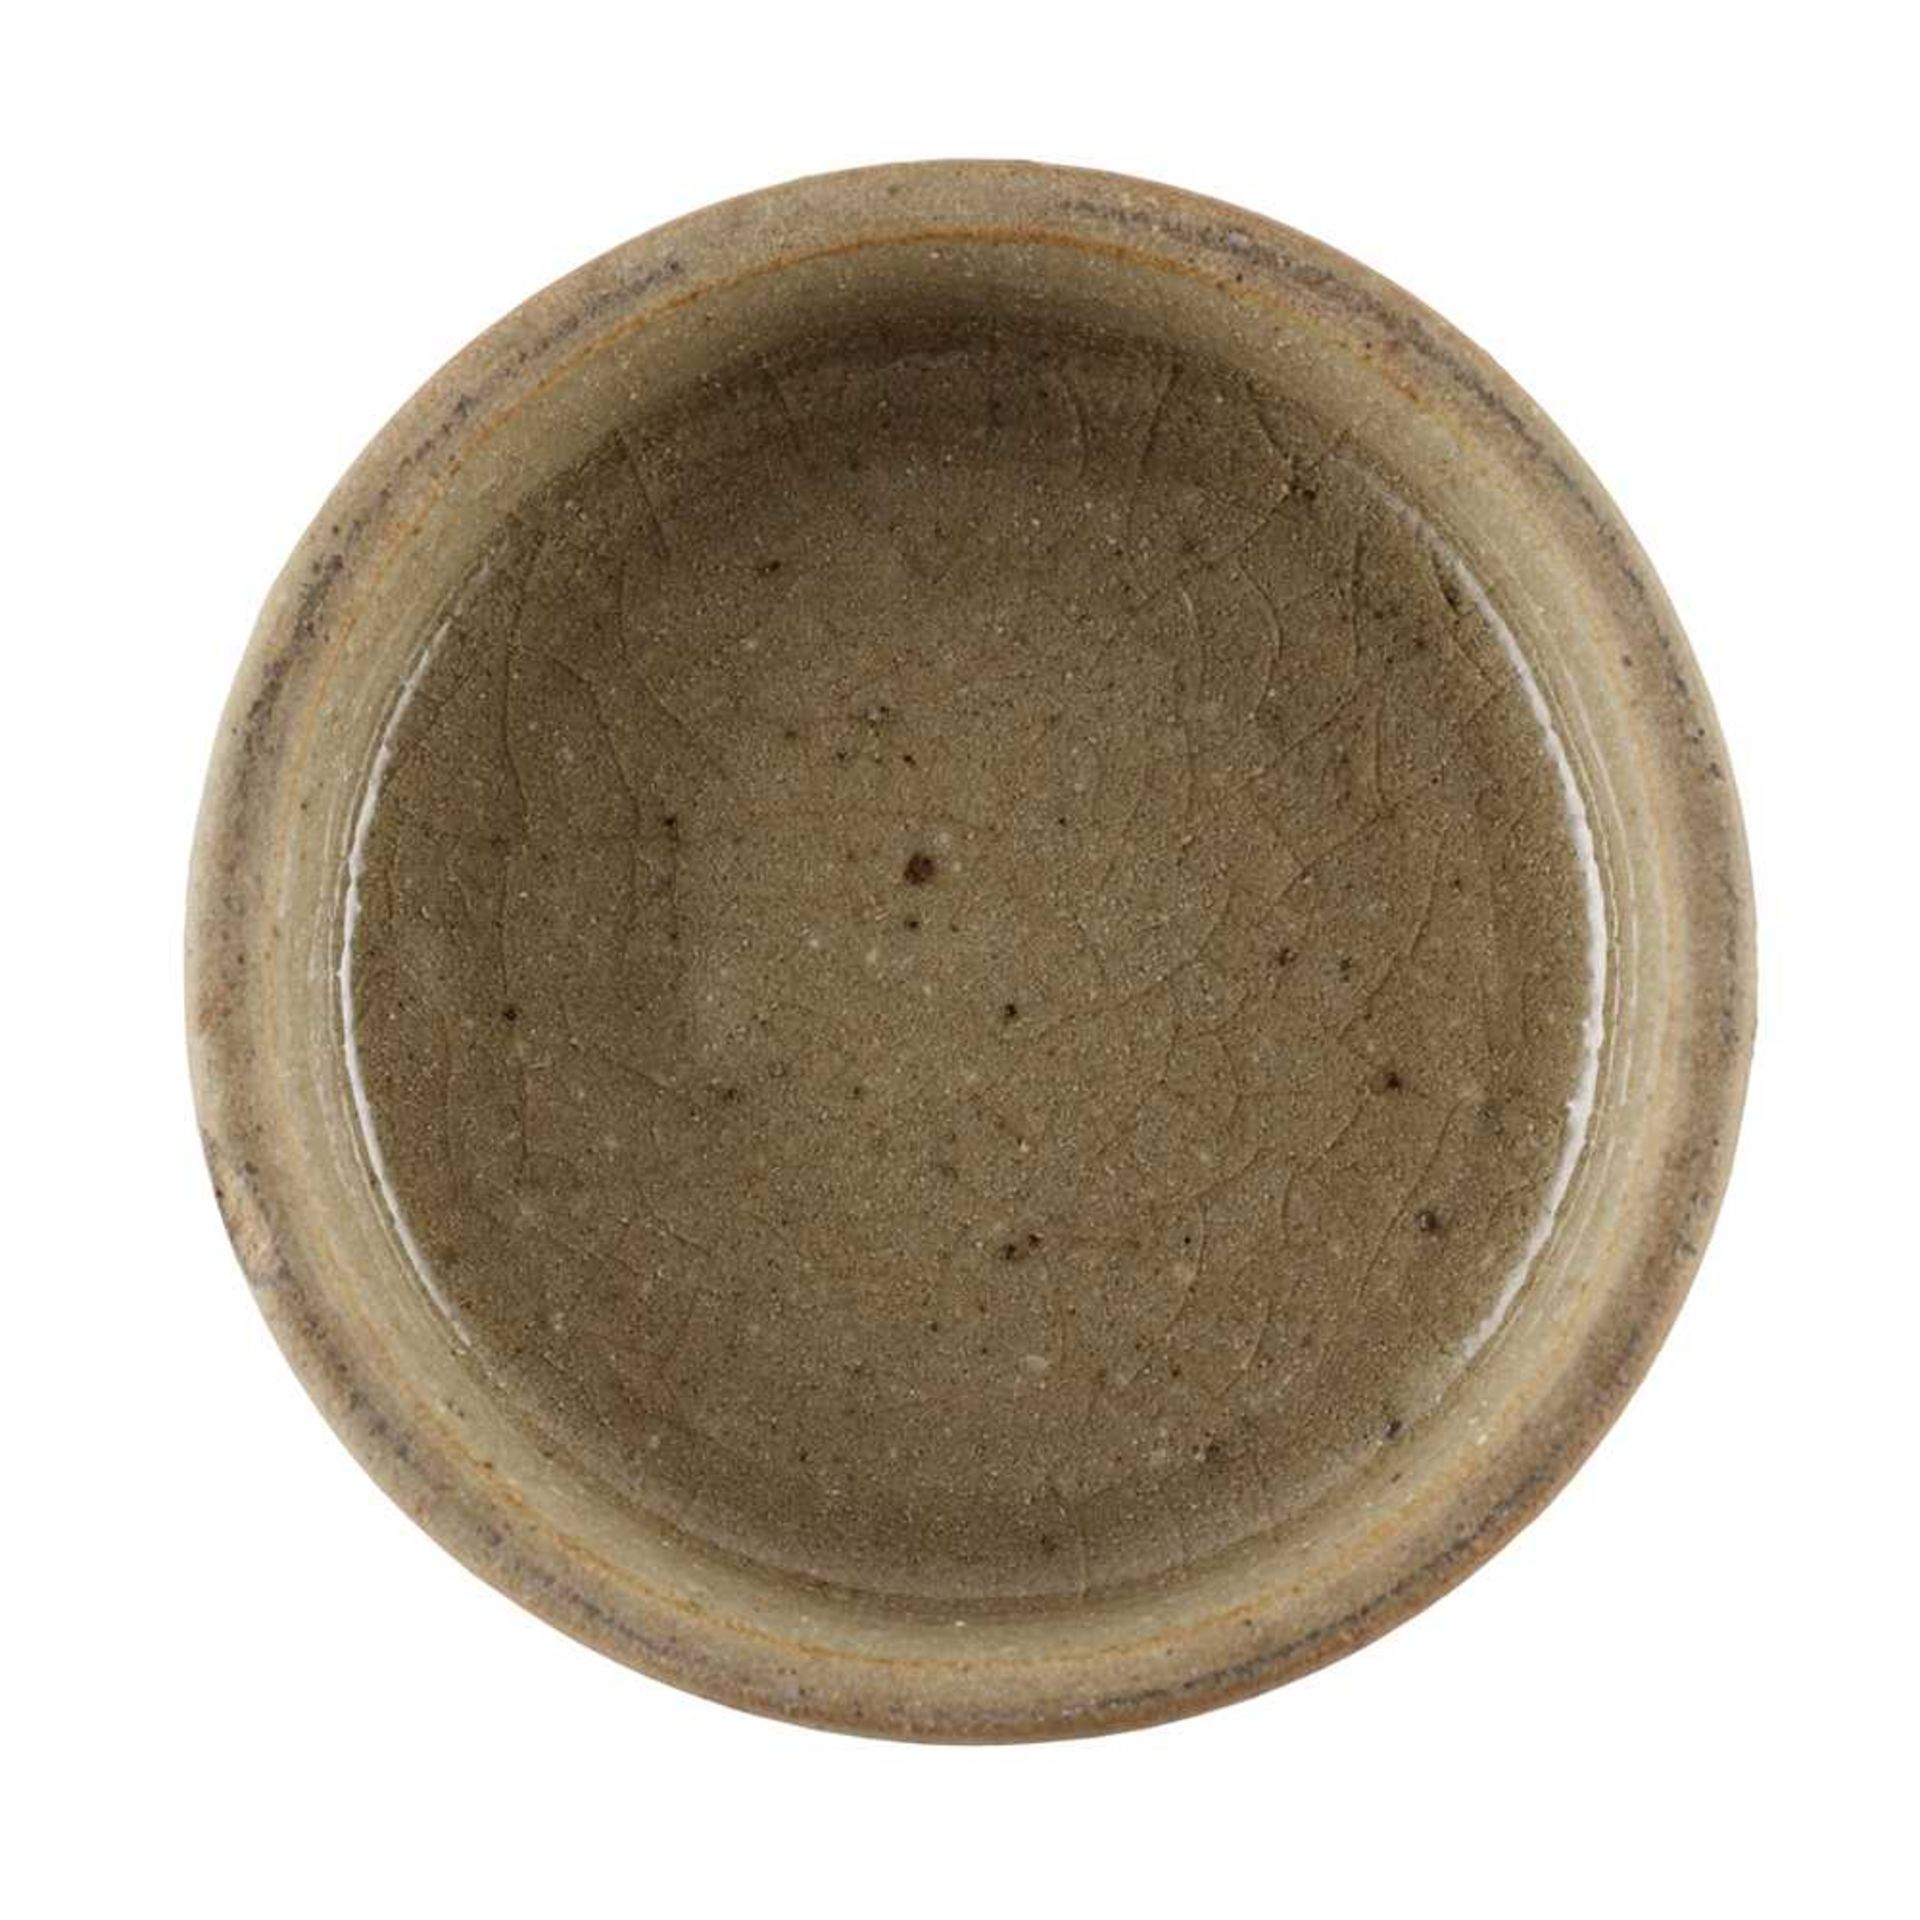 LEACH POTTERY COLLECTION OF TABLEWARE - Image 4 of 13